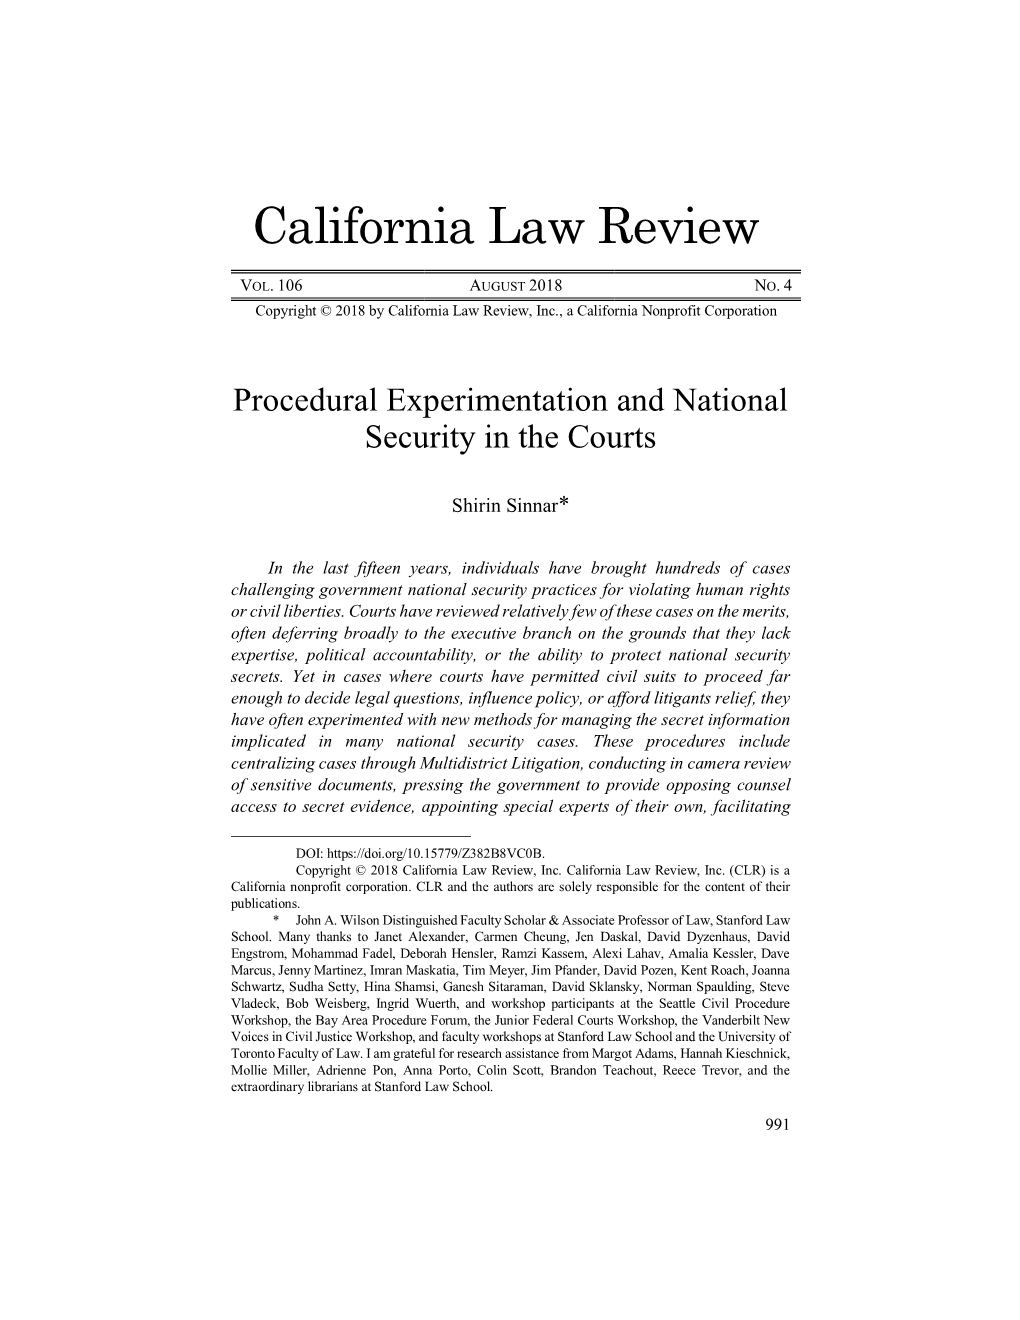 Procedural Experimentation and National Security in the Courts